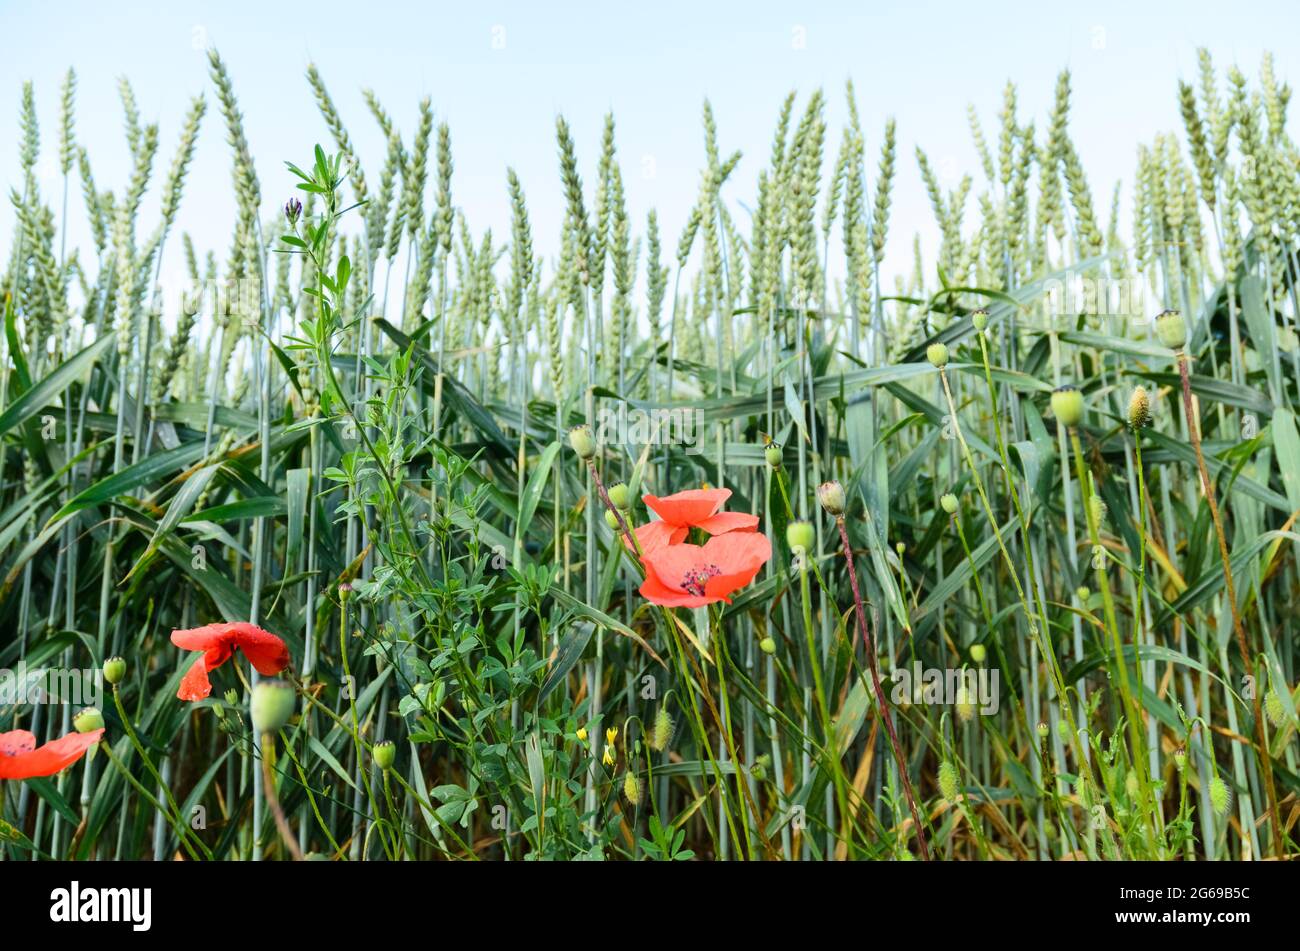 Wheat field (Triticum aestivum) and red poppy flowers (Papaver somniferum) during summertime in Germany, Europe Stock Photo